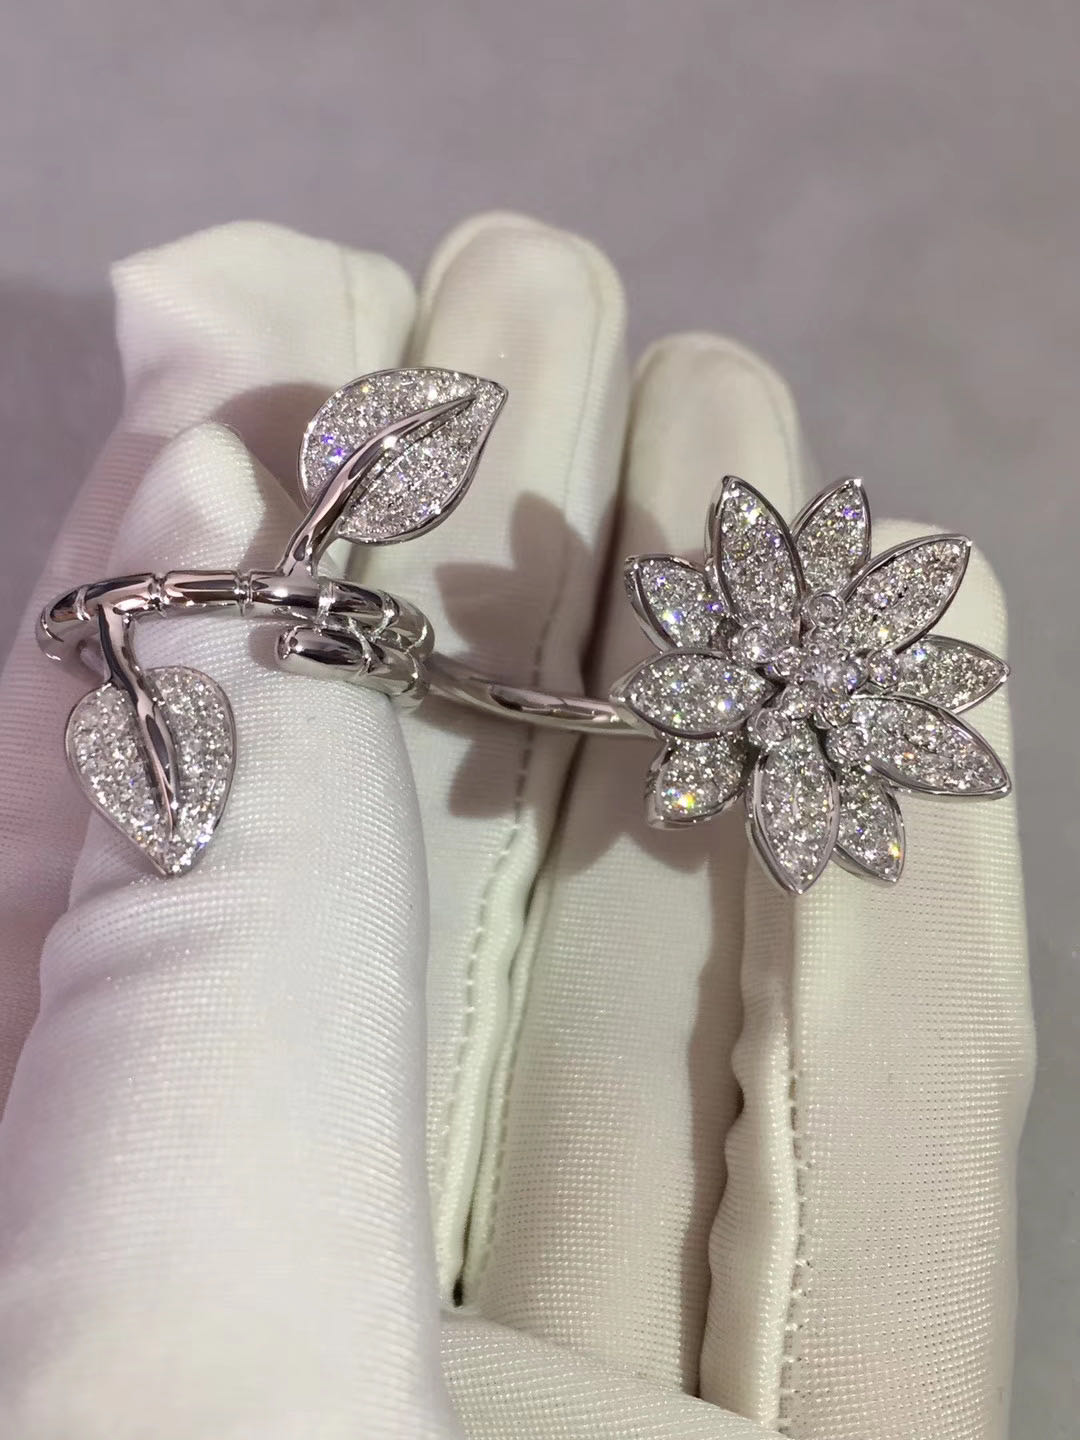 Inspired Van Cleef and Arpels Diamond ‘Lotus’ Between the Finger Ring 18K White Gold